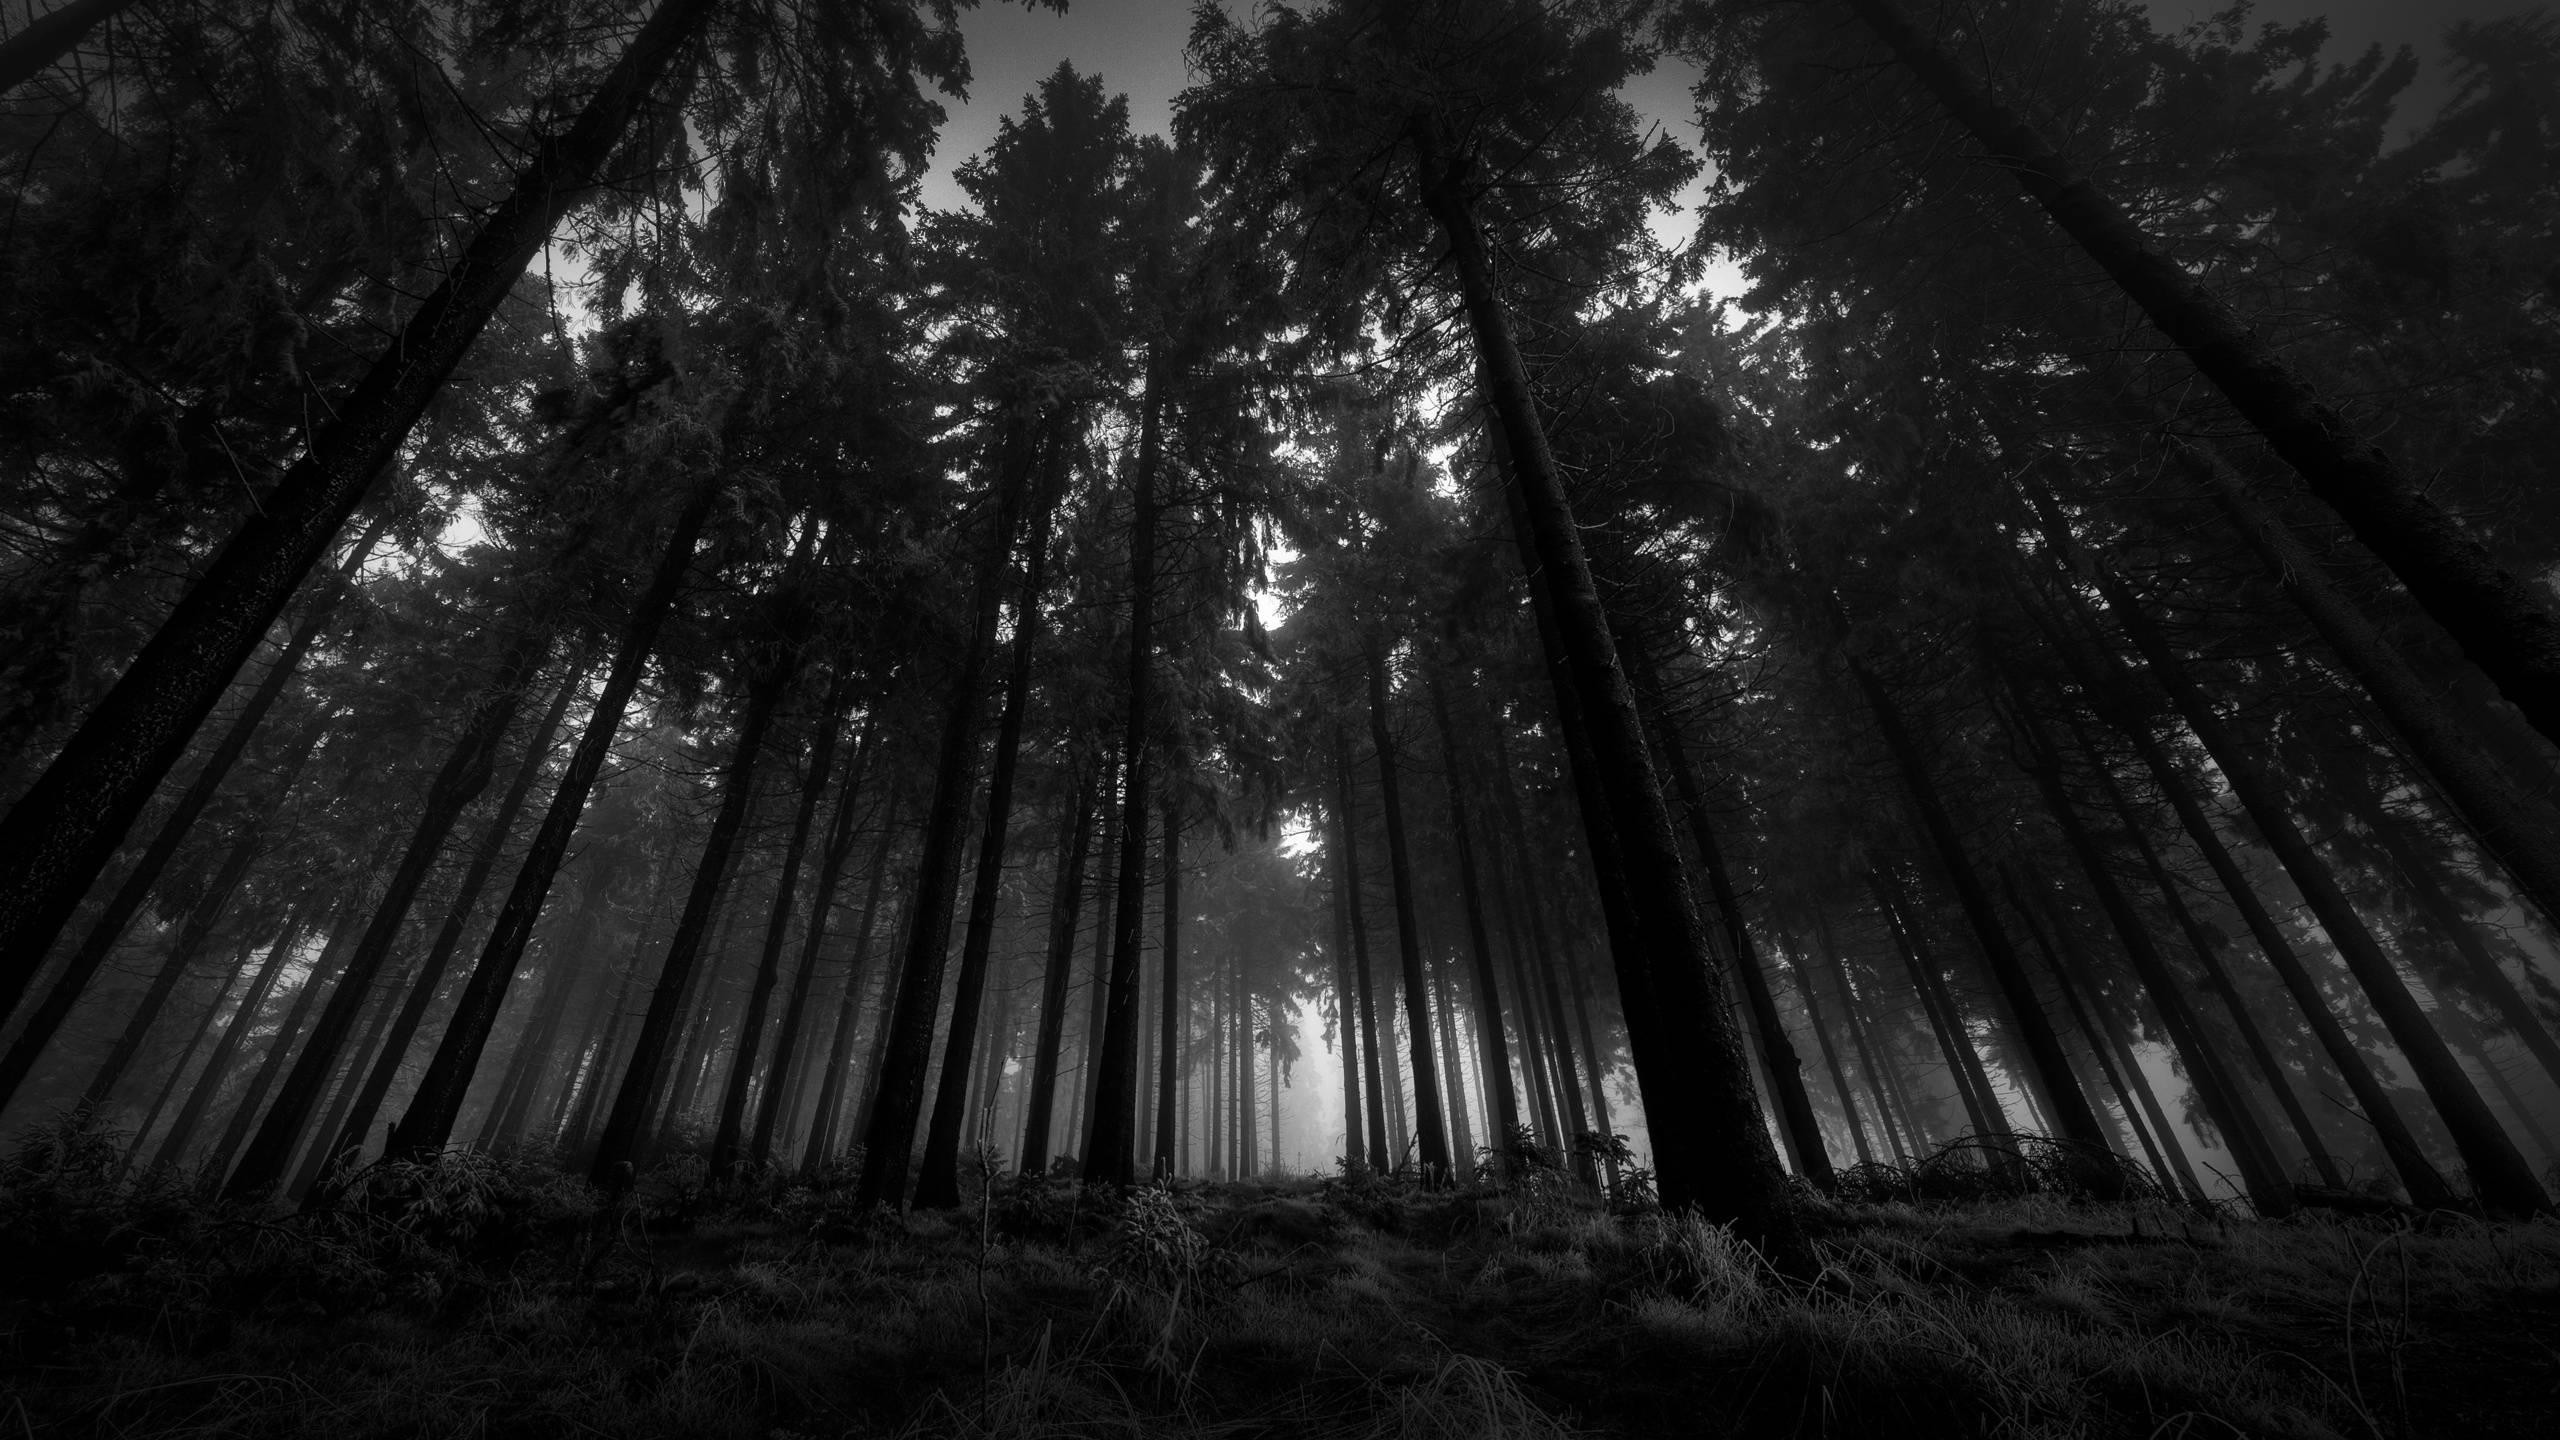 General 2560x1440 dark forest nature monochrome worm's eye view trees plants